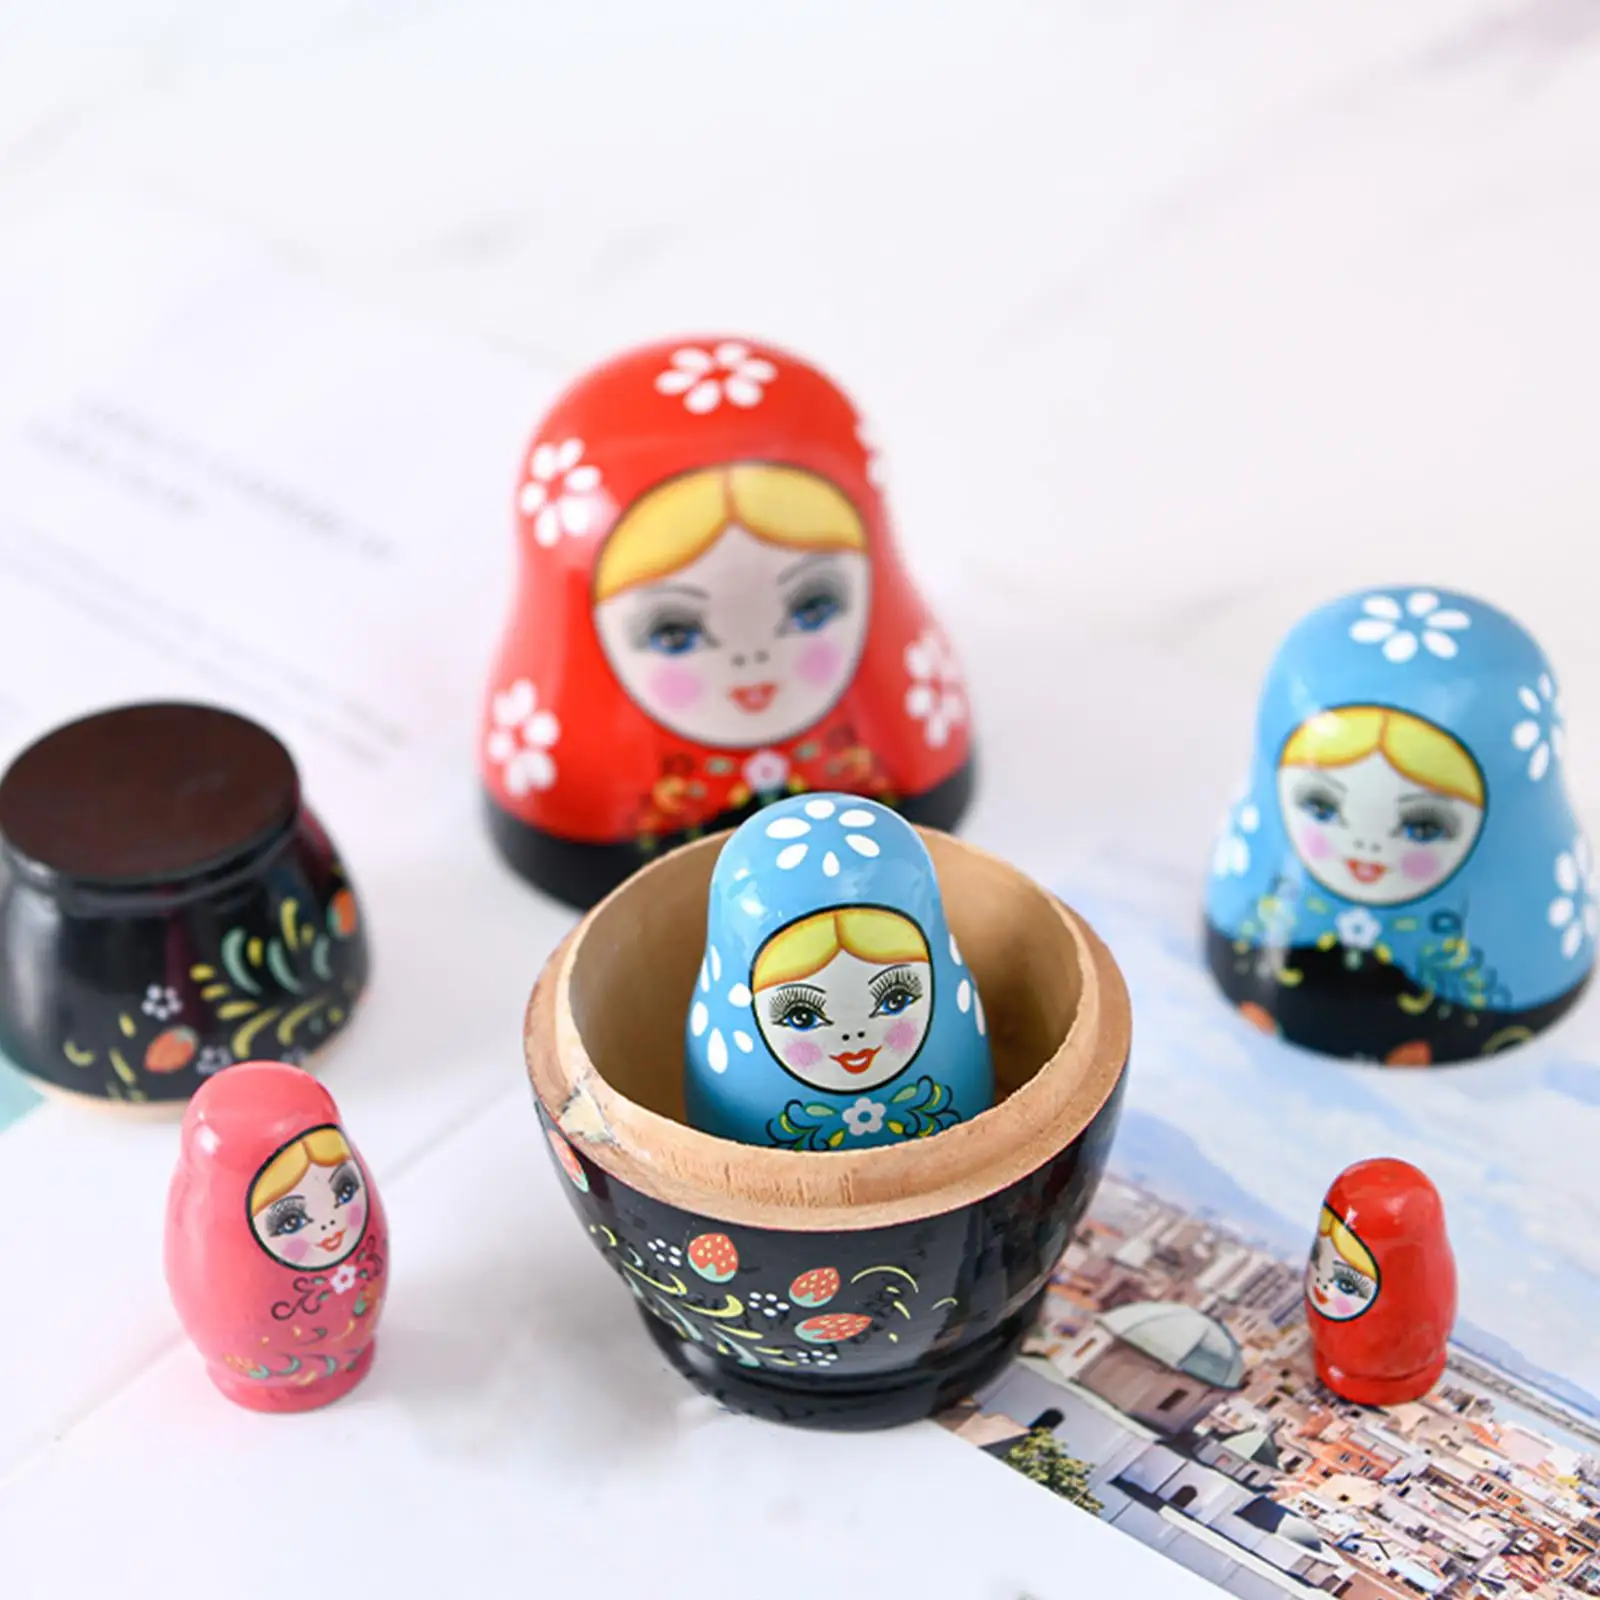 5x Handmade Russian Nesting Dolls Wood Crafts Stacking Toys for Children Toddler Girls Birthday Gifts Home Decor